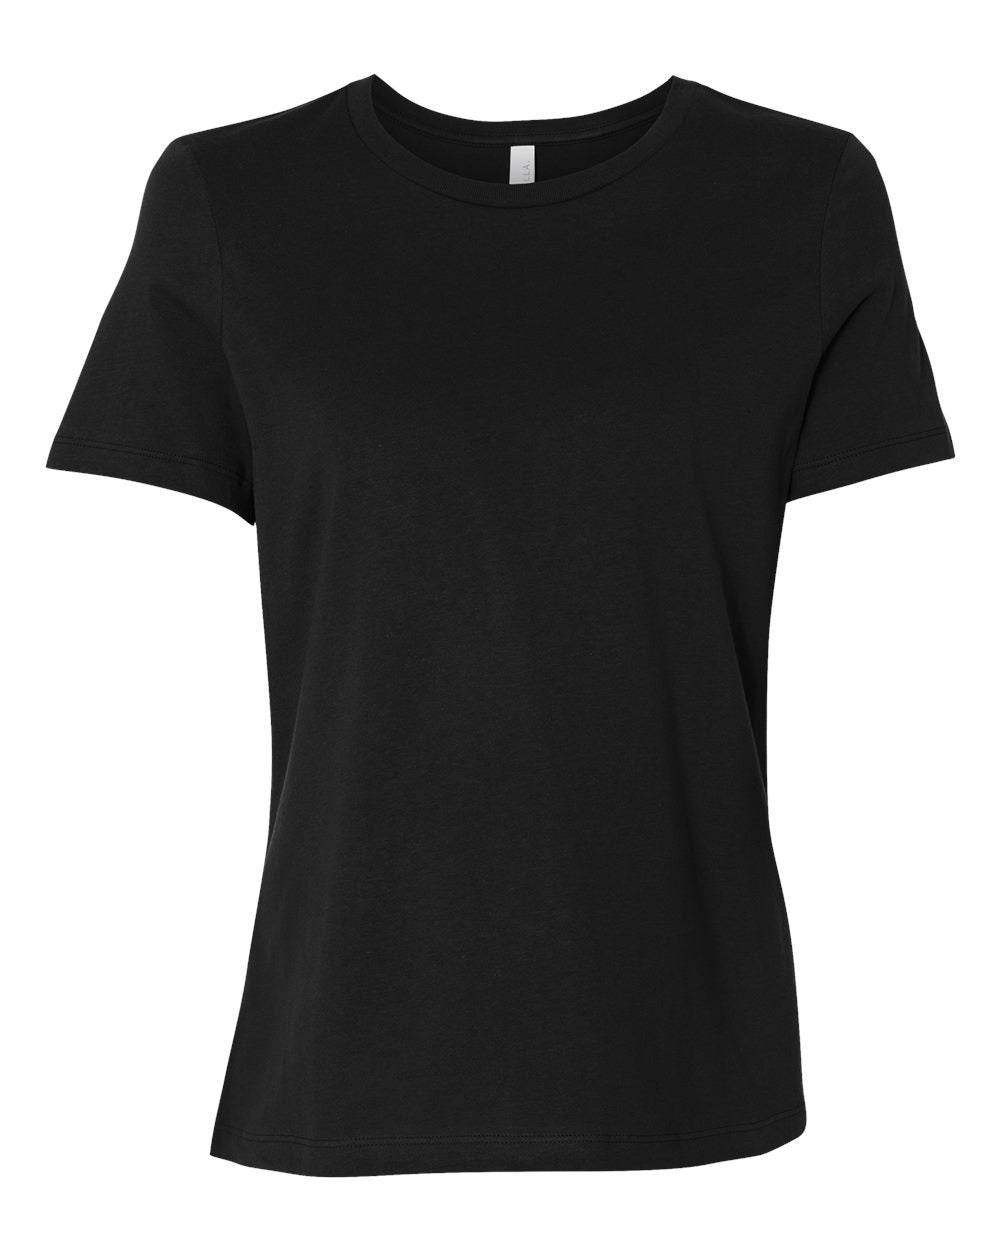 BELLA + CANVAS Women’s Relaxed Jersey Tee 6400 #color_Black